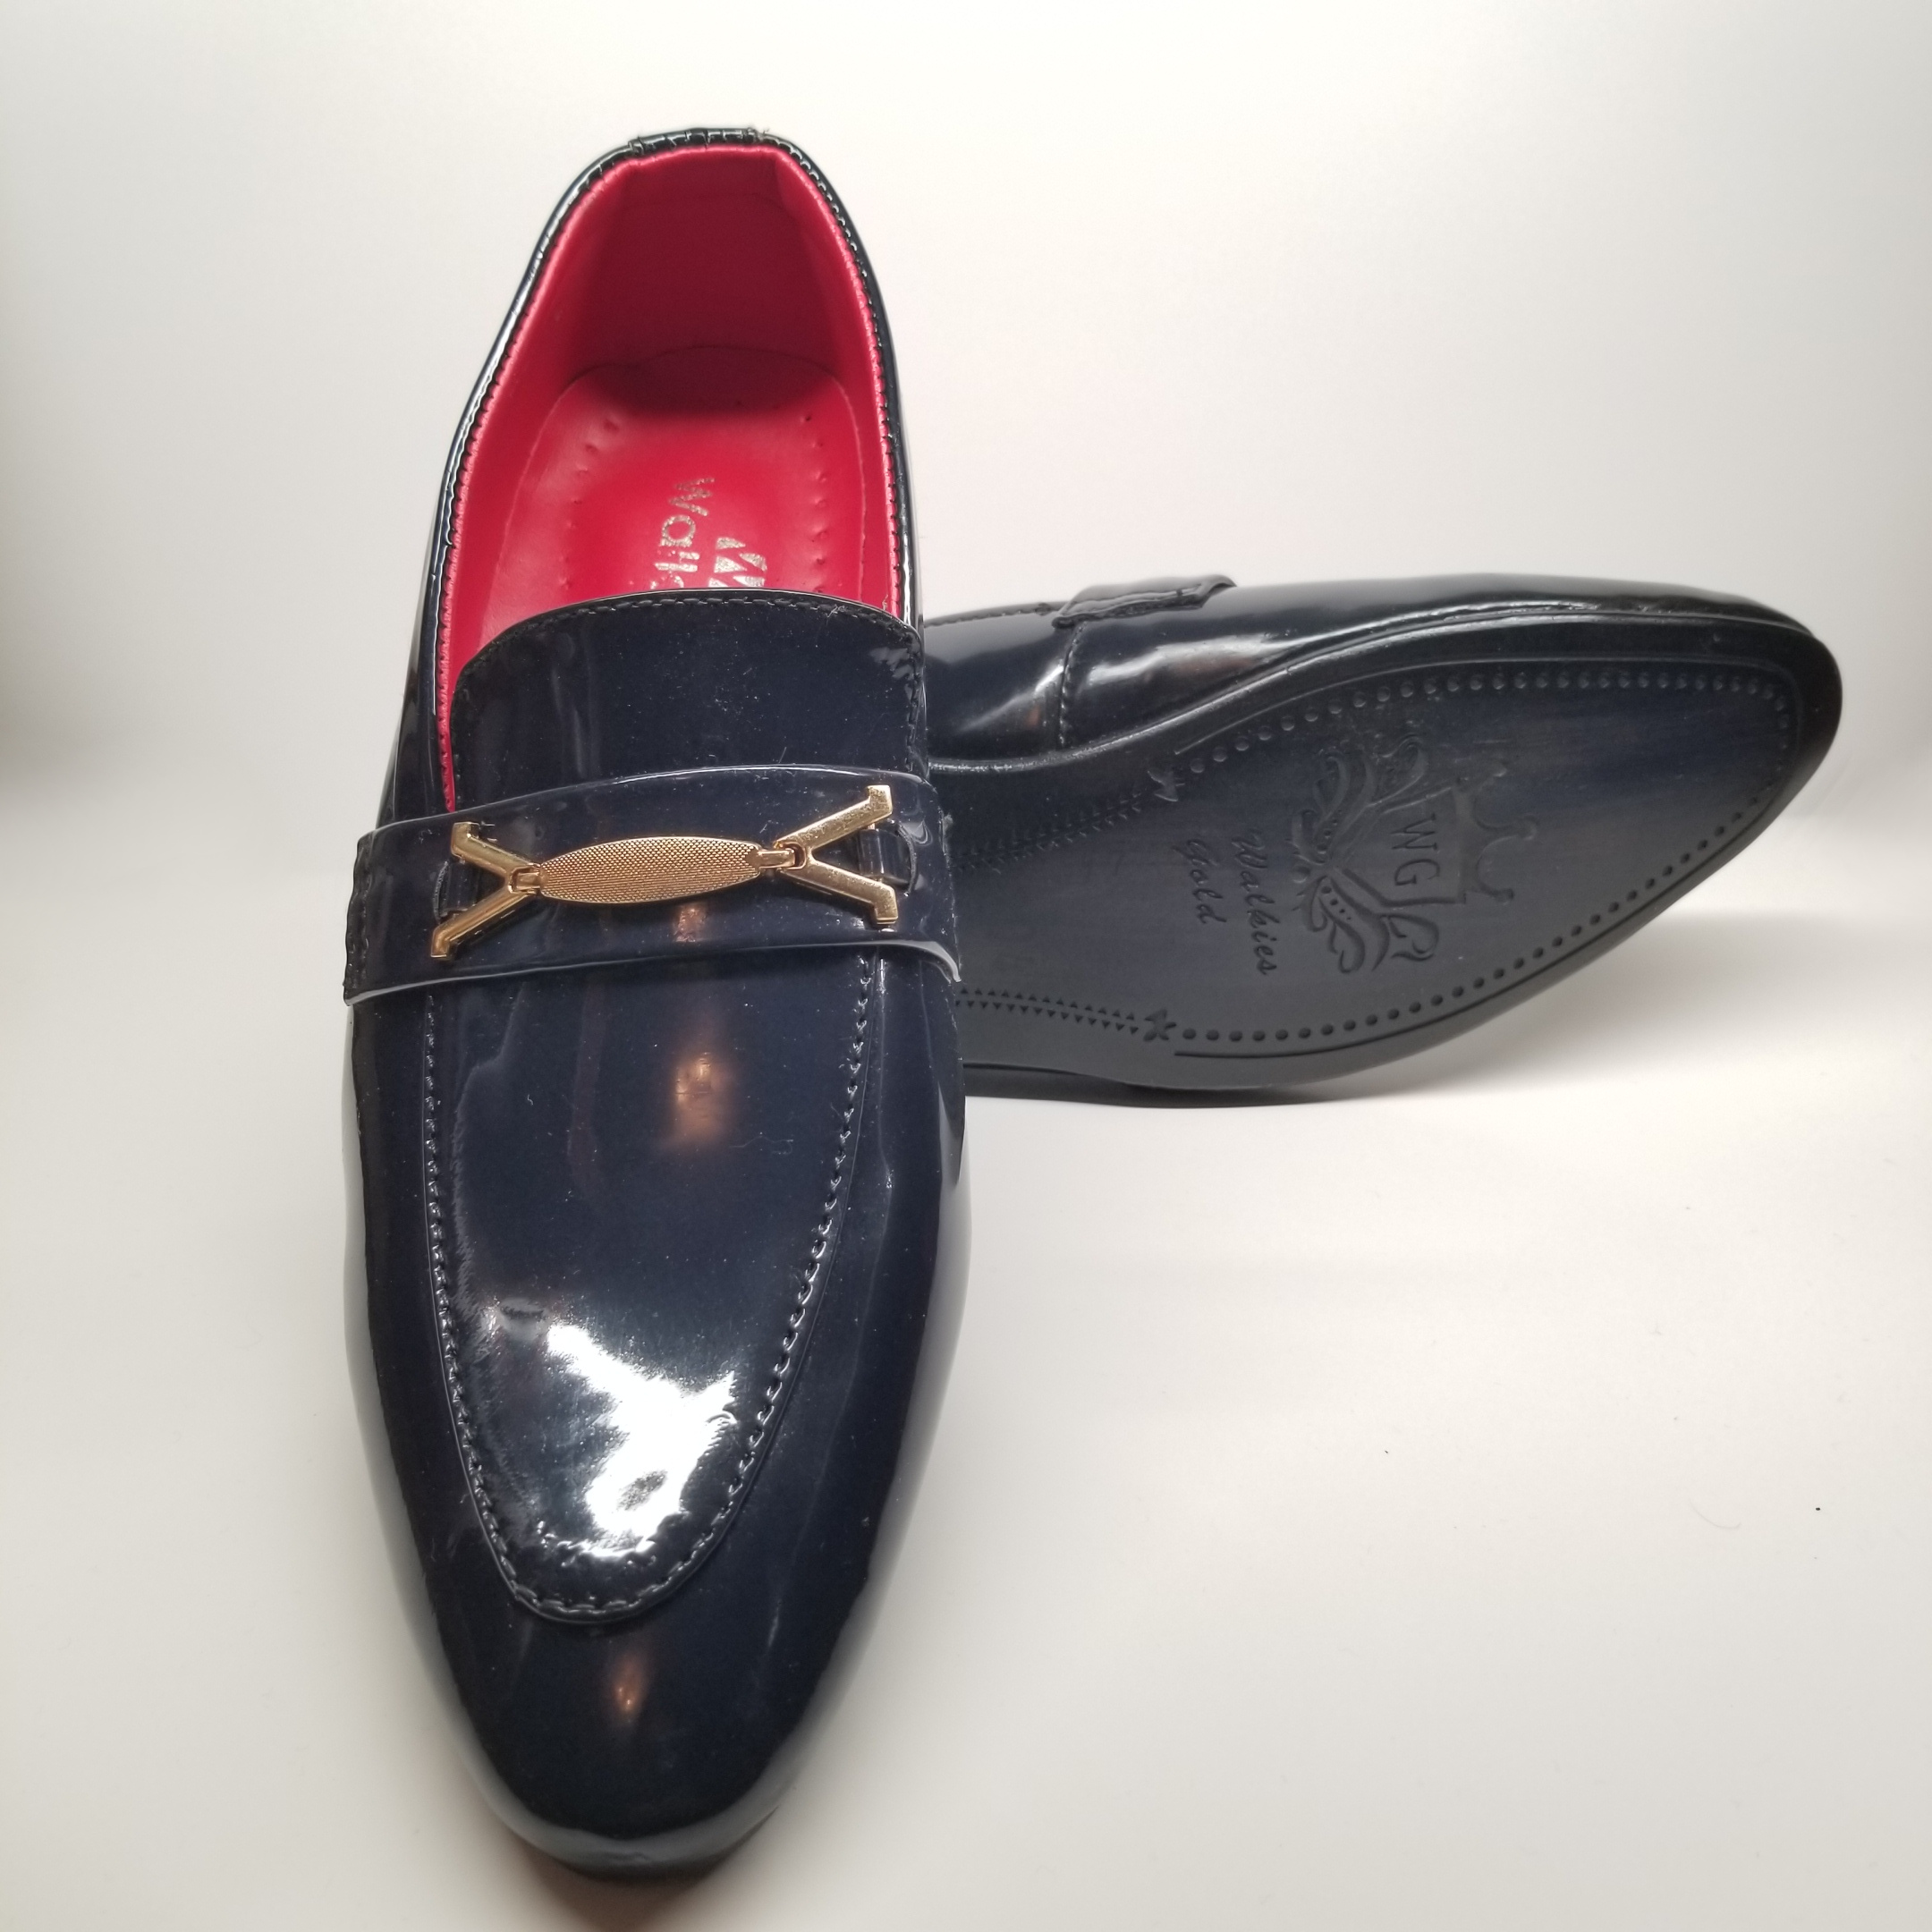 Moonshine Master dress shoes by Walkies at NMFootwear.com